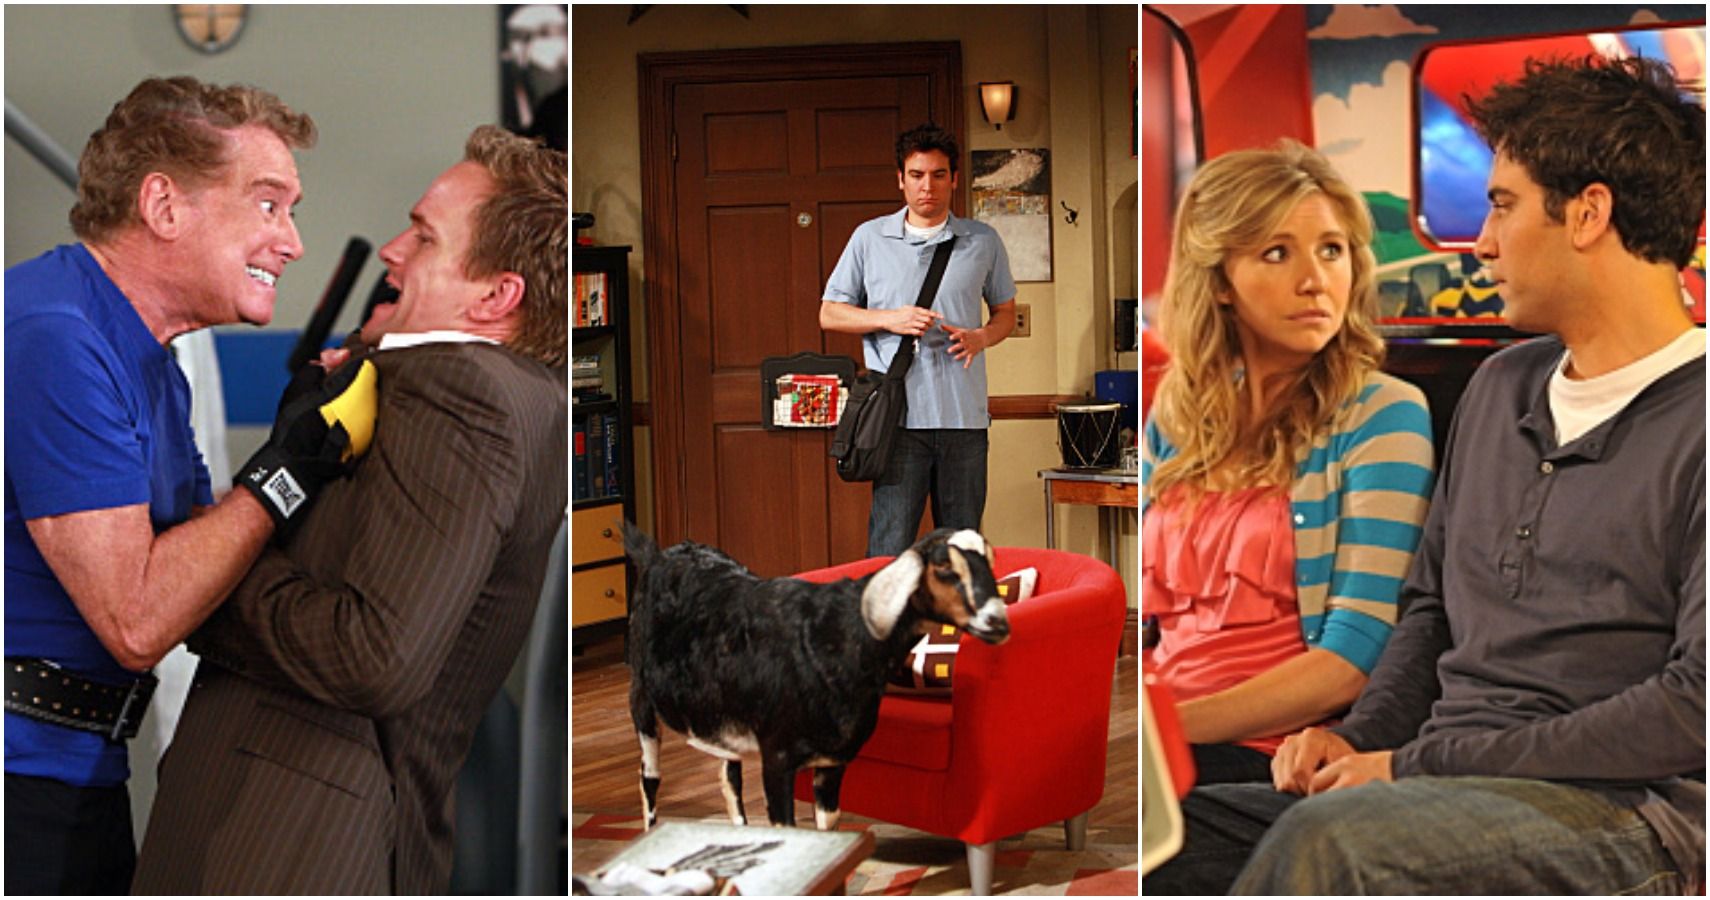 How I Met Your Mother: The 10 Best Episodes of Season 4, According to IMDb